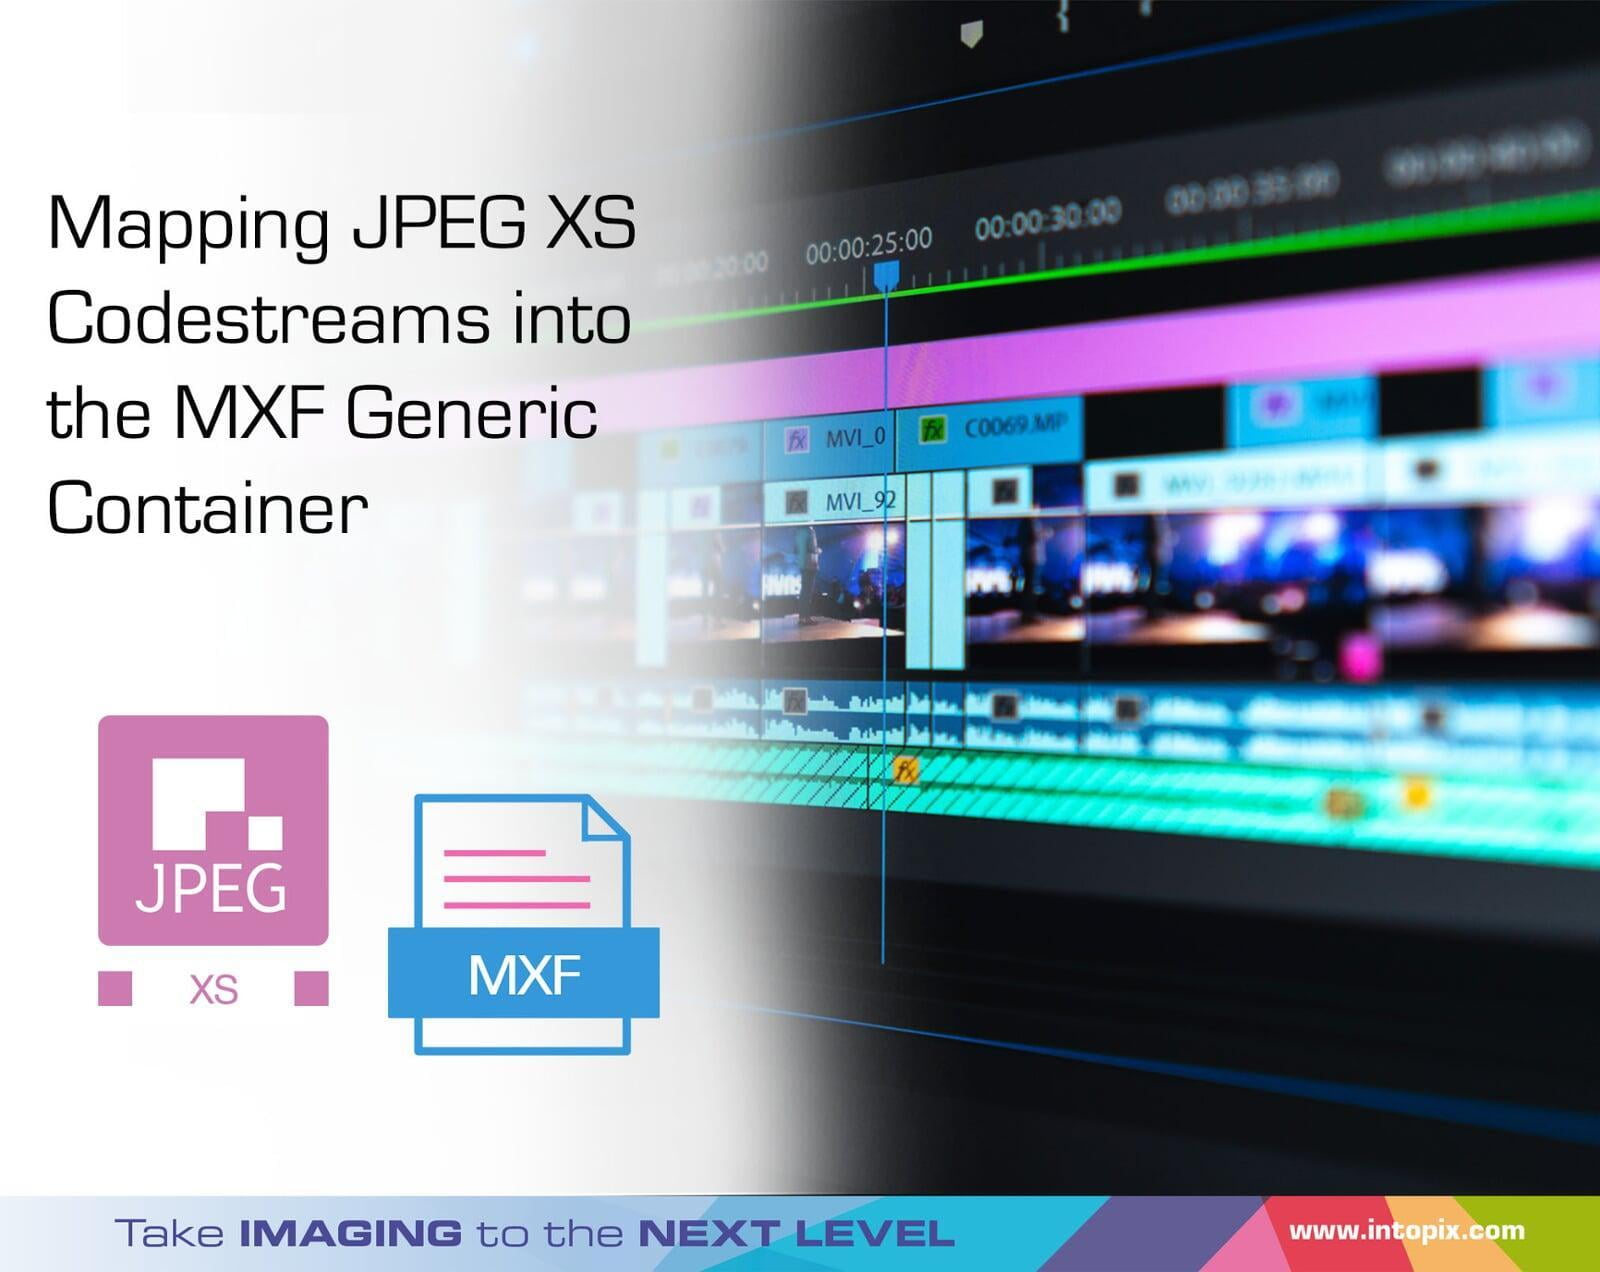 Mapping JPEG XS Codestreams into the MXF Generic Container